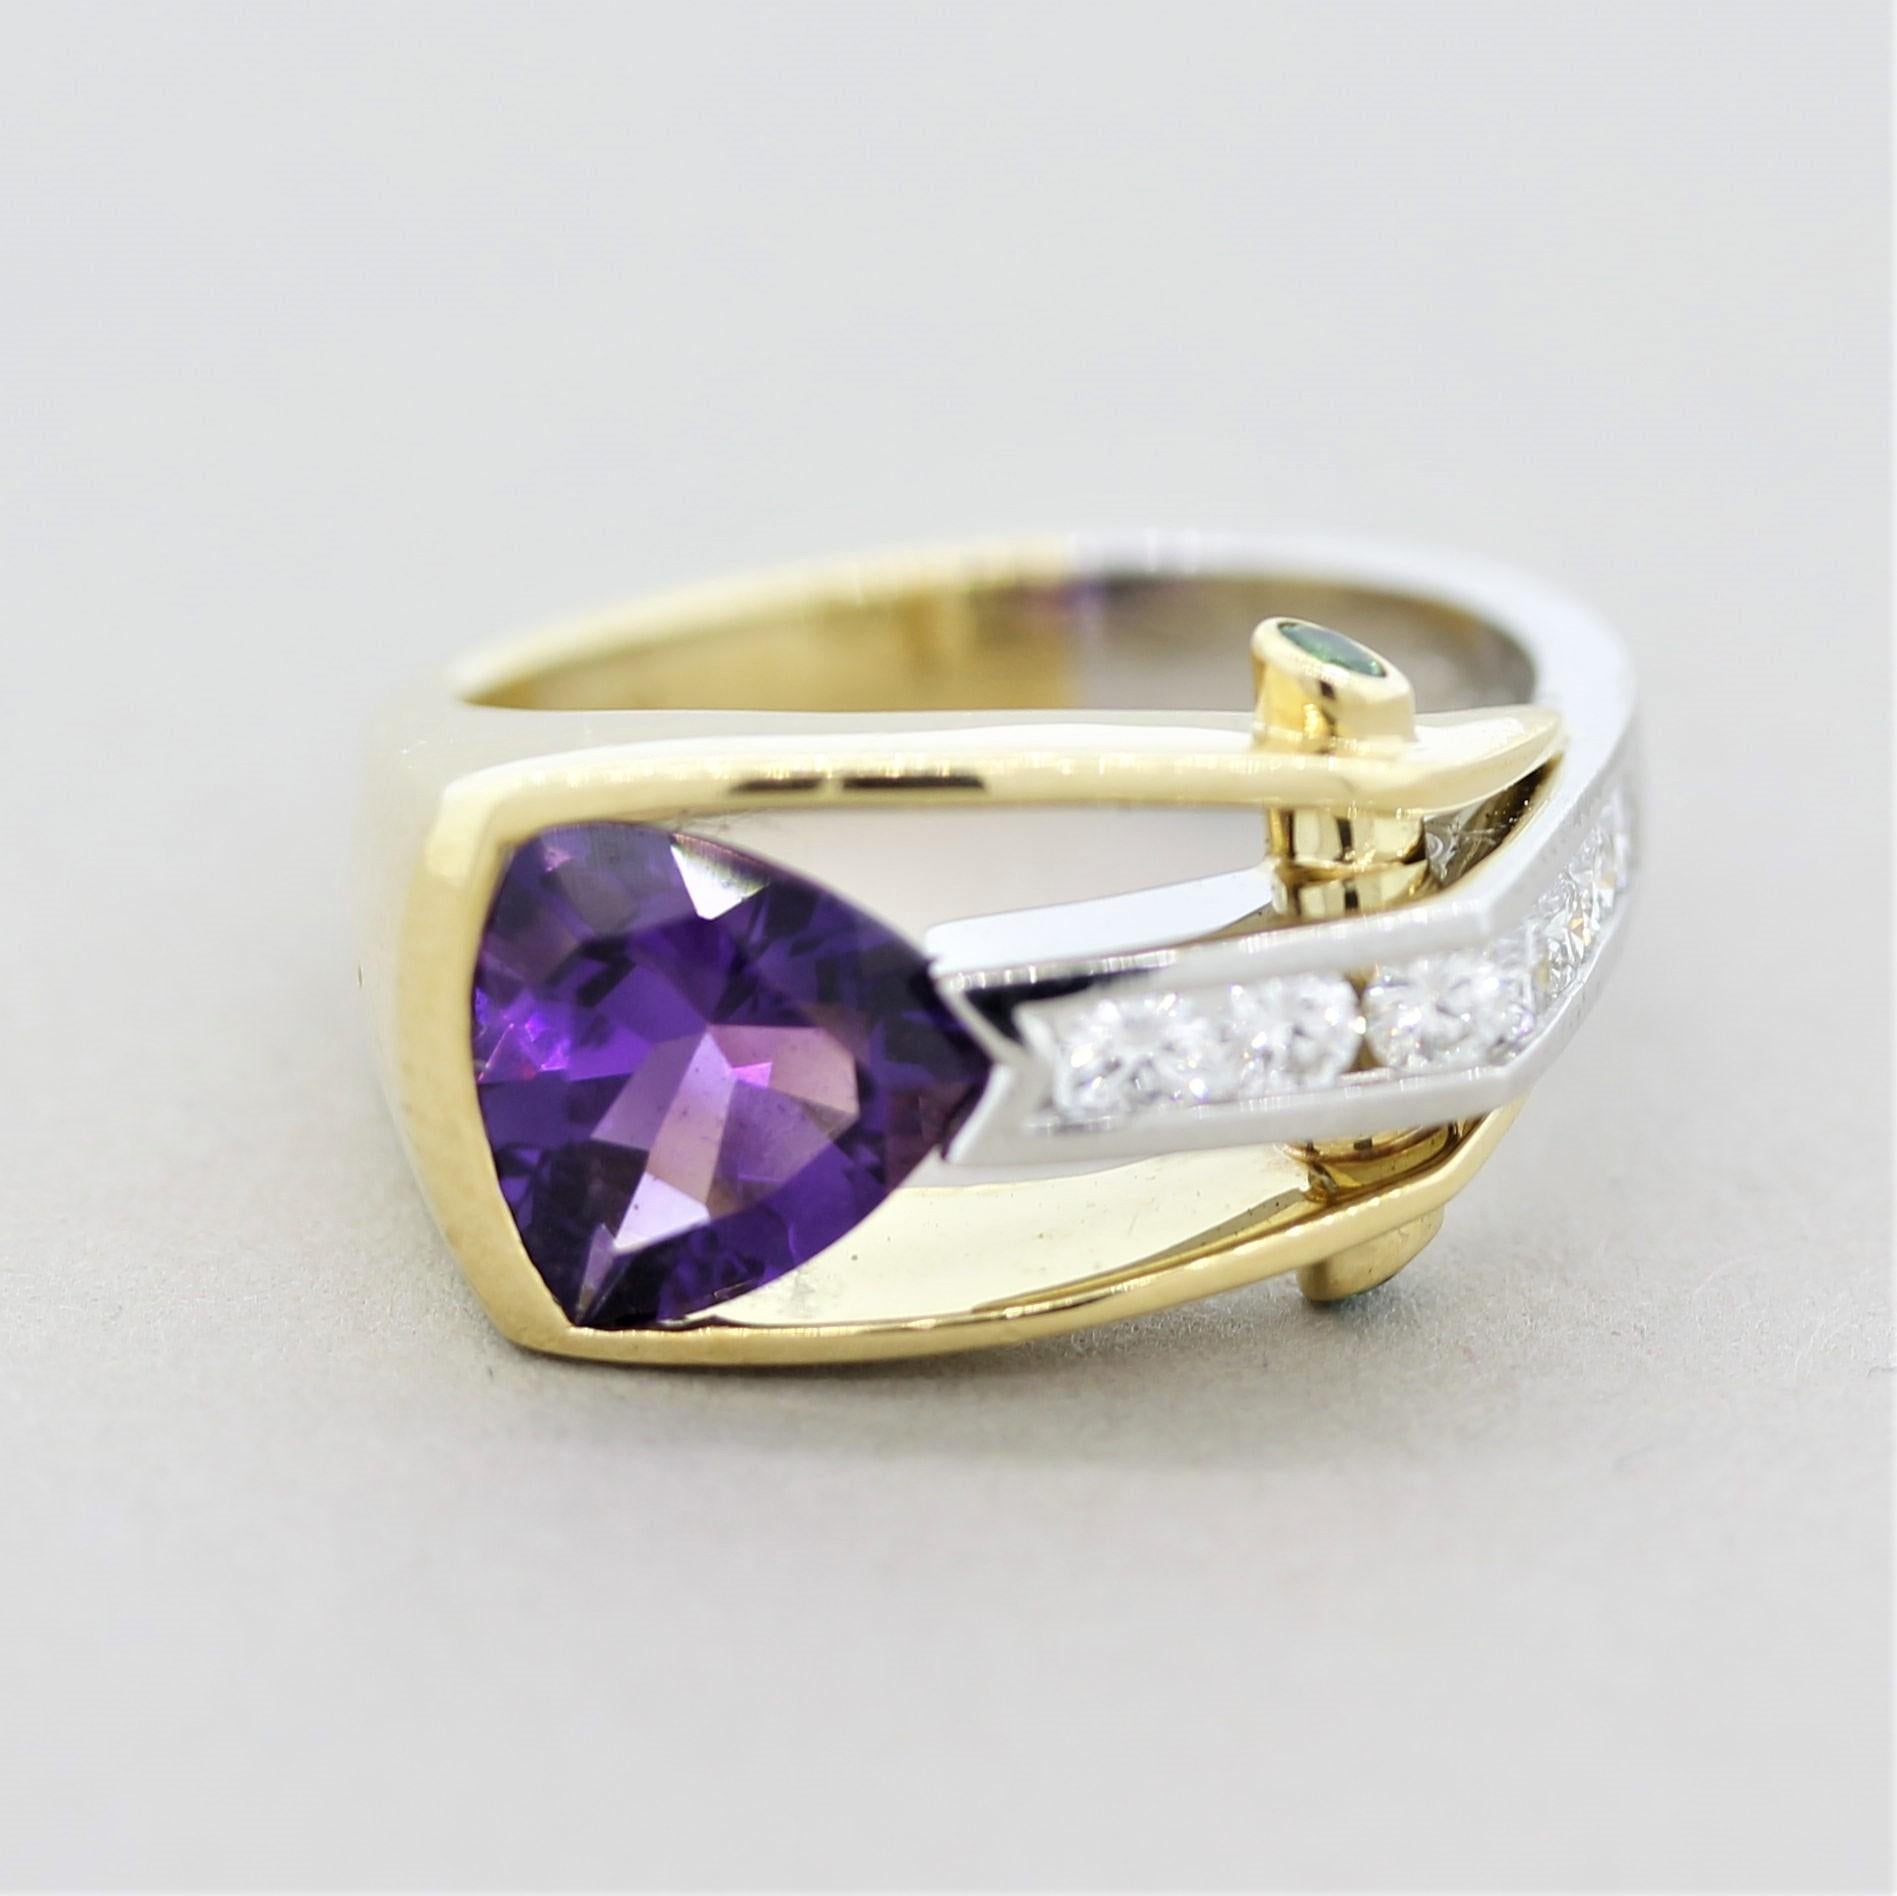 A superb ring in its quality. It features a 1.43 carat trillion-cut amethyst along with 0.28 carats of round brilliant-cut diamonds. They are accented by 2 round bright green tsavorites on the sides. Made in both 18k yellow gold and platinum, an